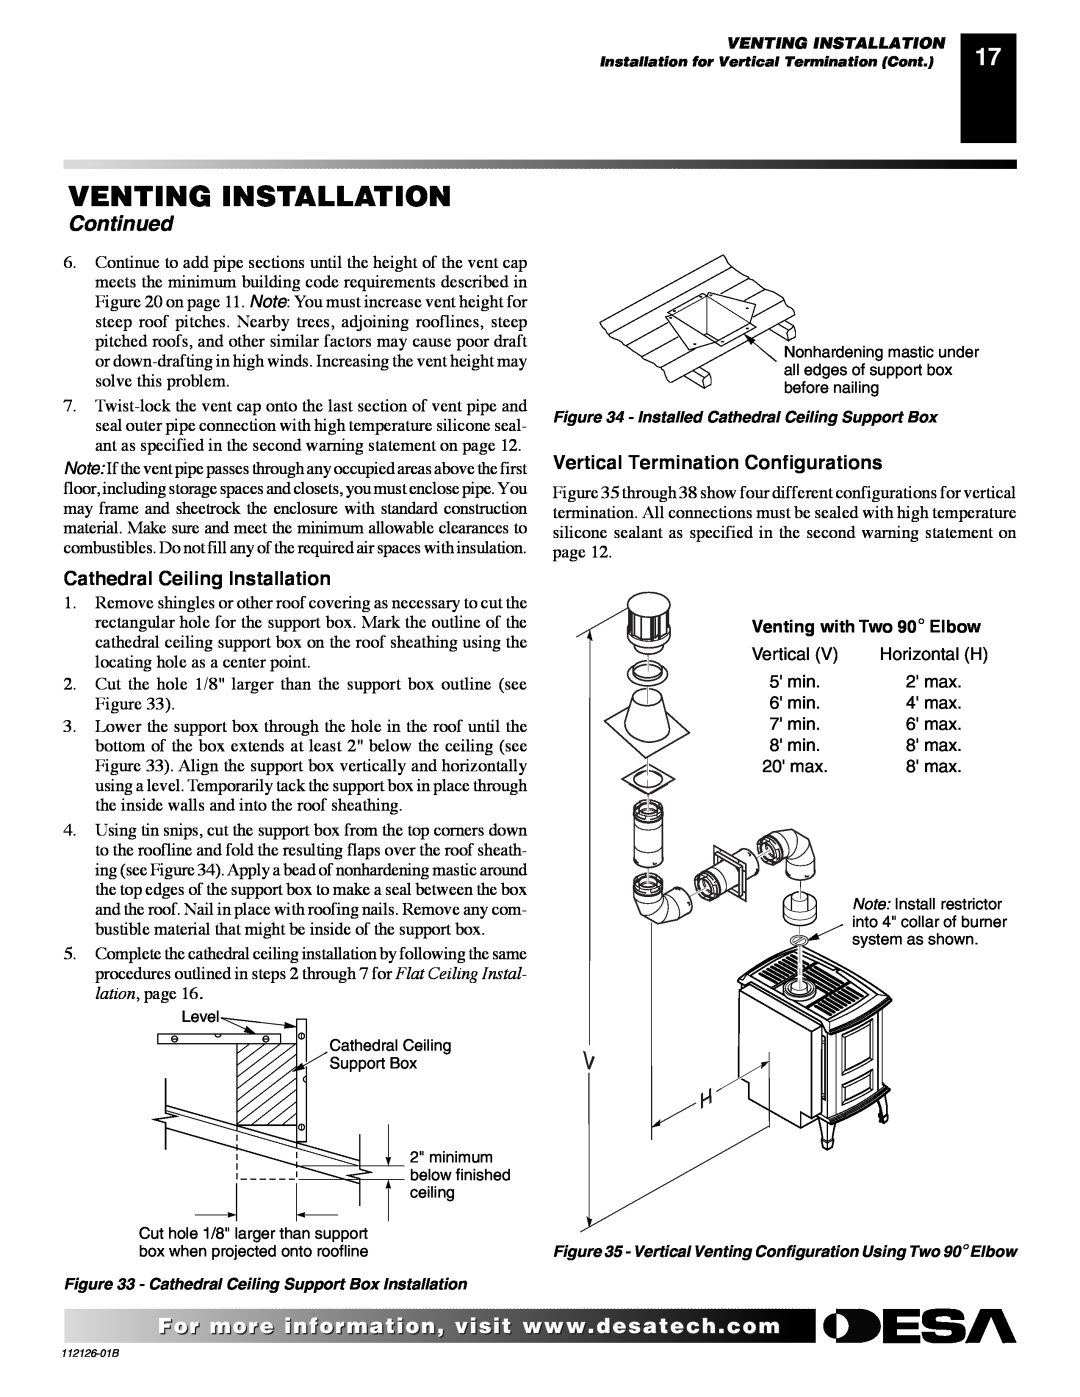 Desa SDVBPD, SDVBND Venting Installation, Continued, Cathedral Ceiling Installation, Vertical Termination Configurations 